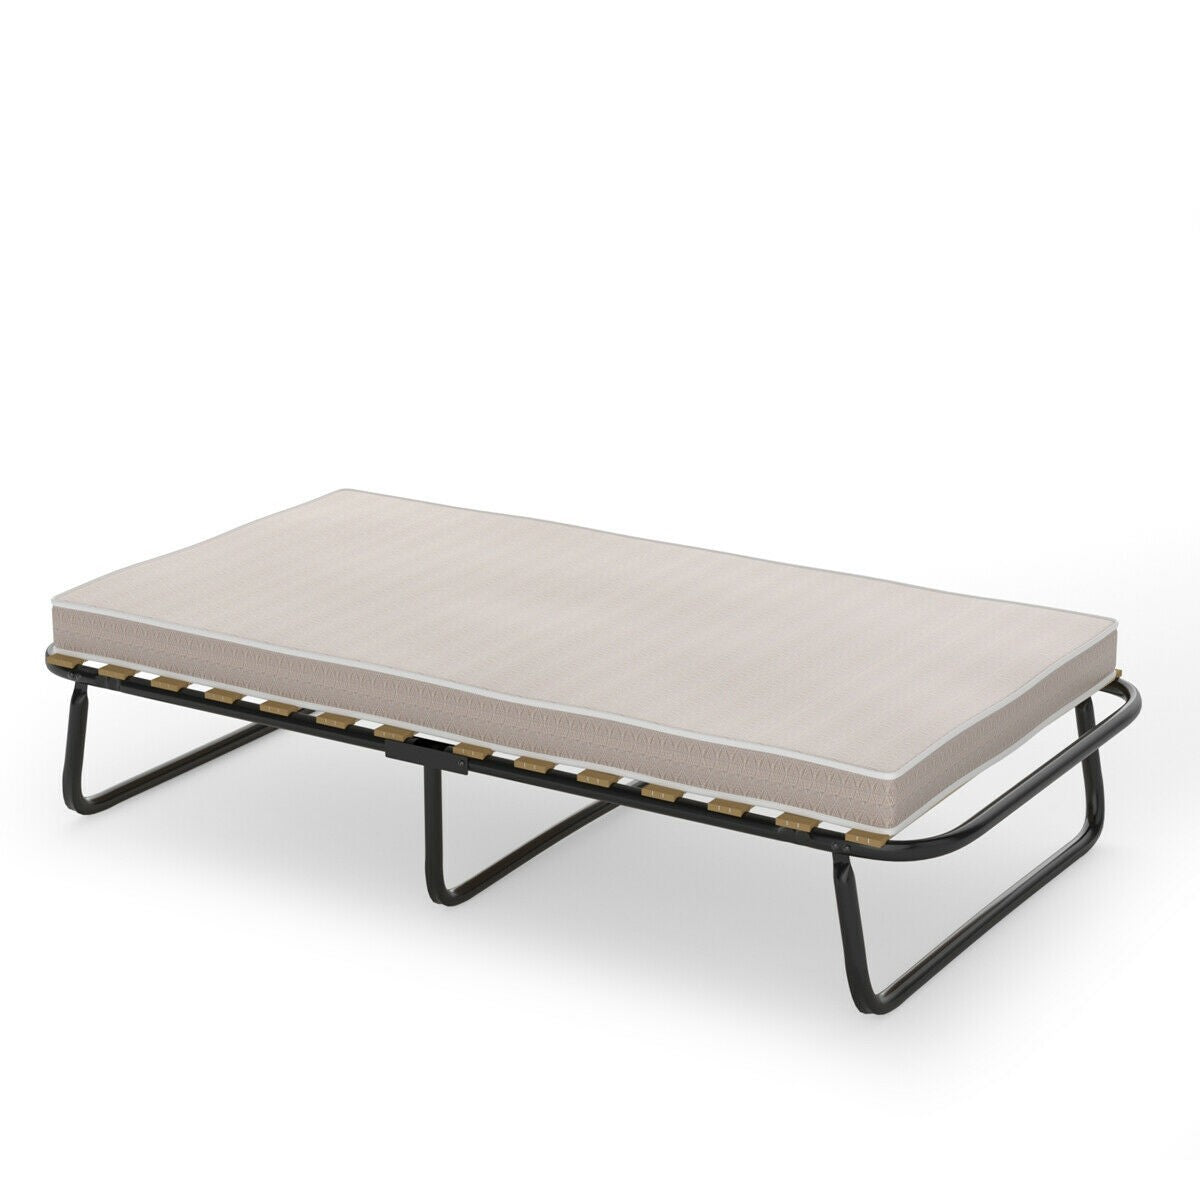 Folding Guest Bed-with Memory Foam Mattress